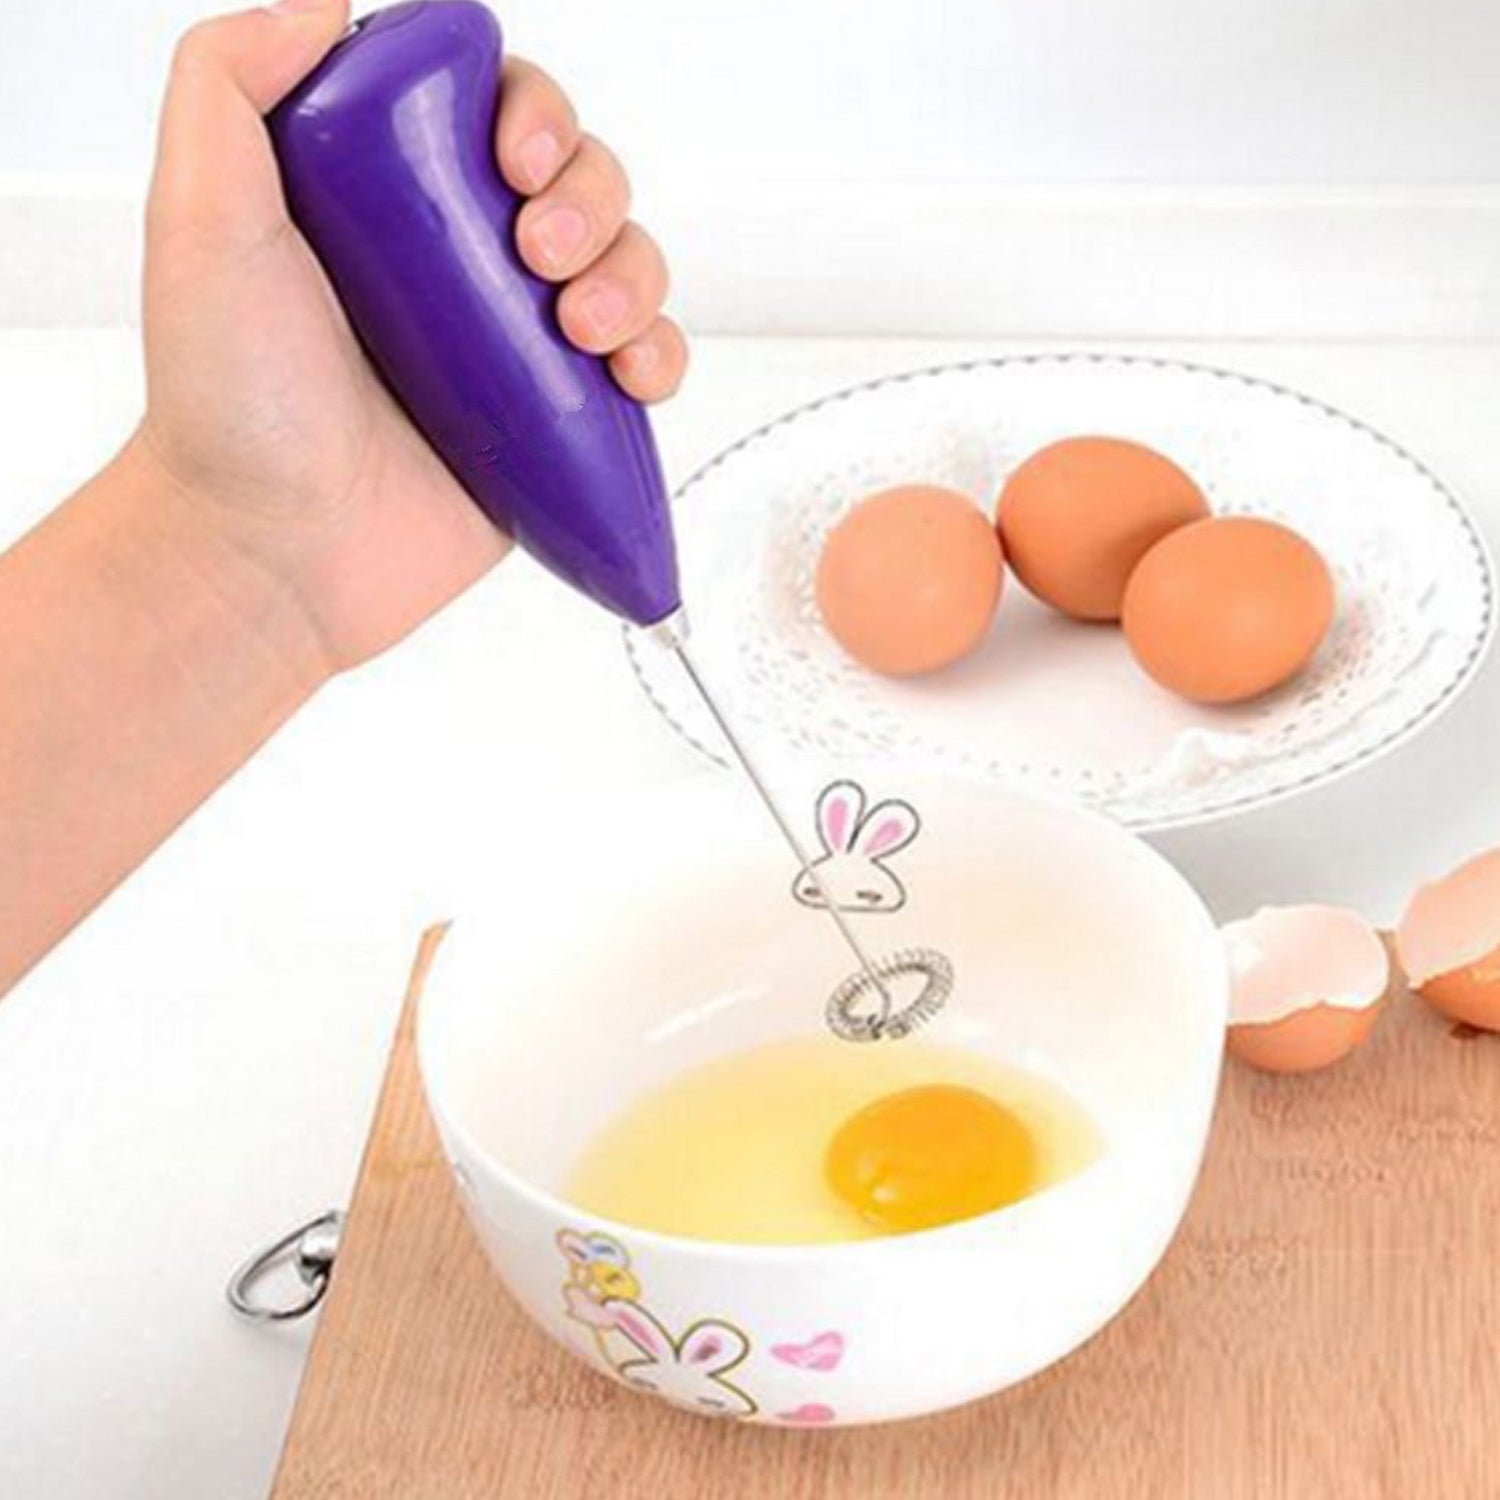 2773 Hand Blender For Mixing And Blending, While Making Food Stuffs And Items At Homes Etc.